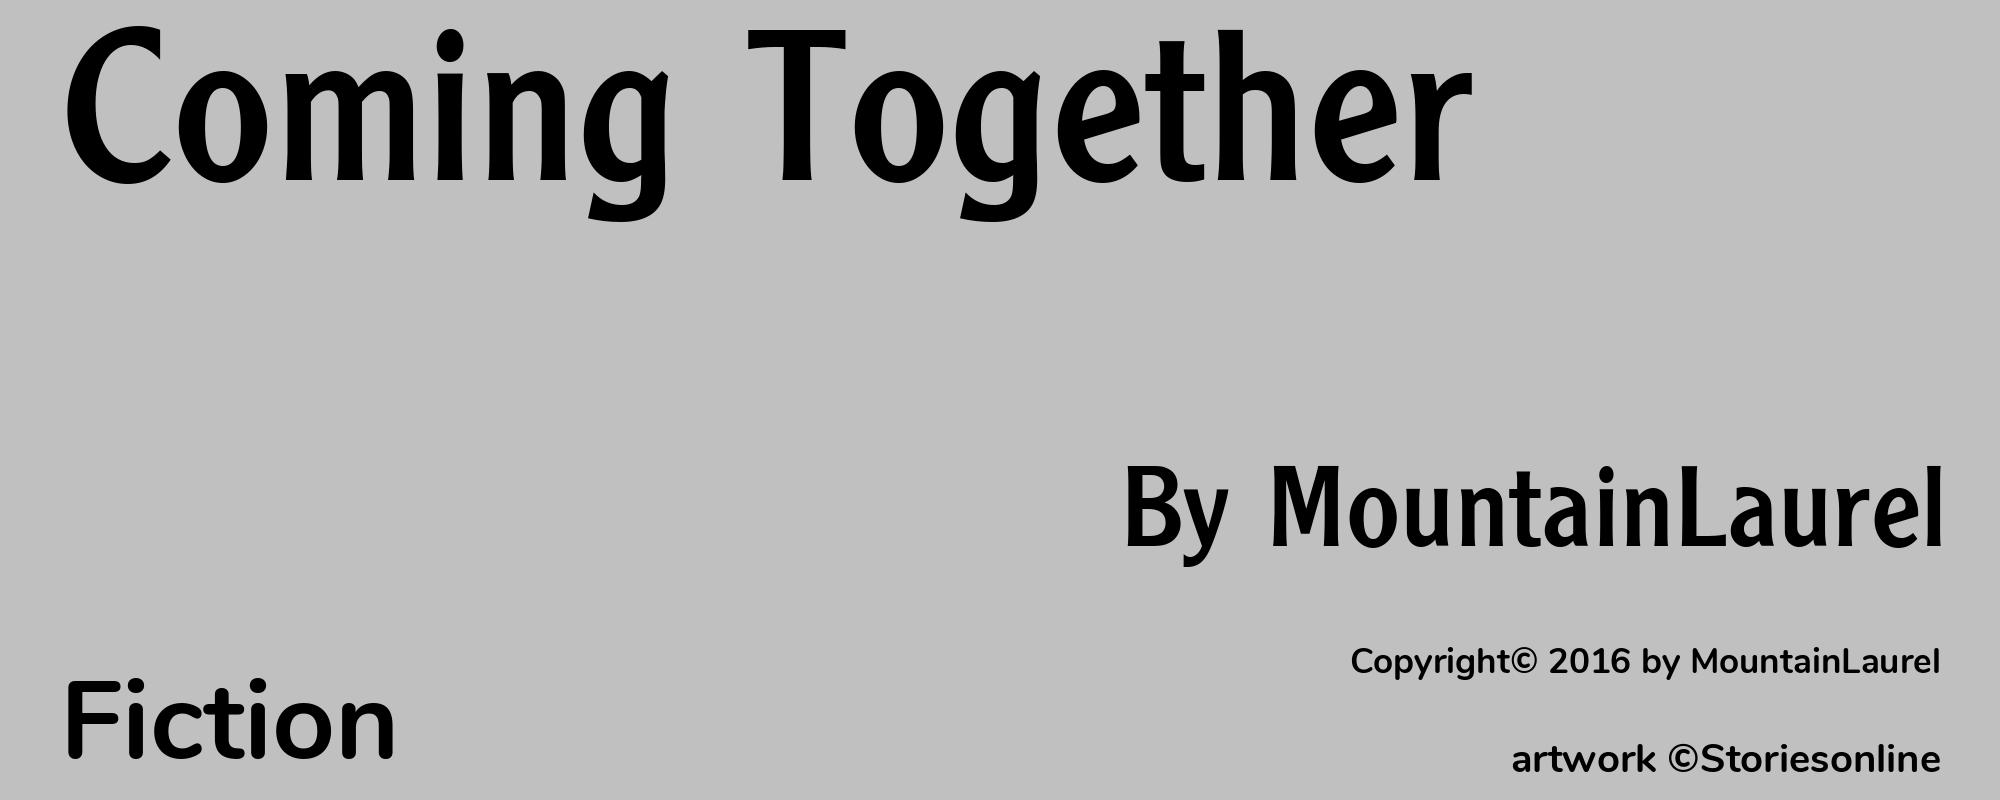 Coming Together - Cover